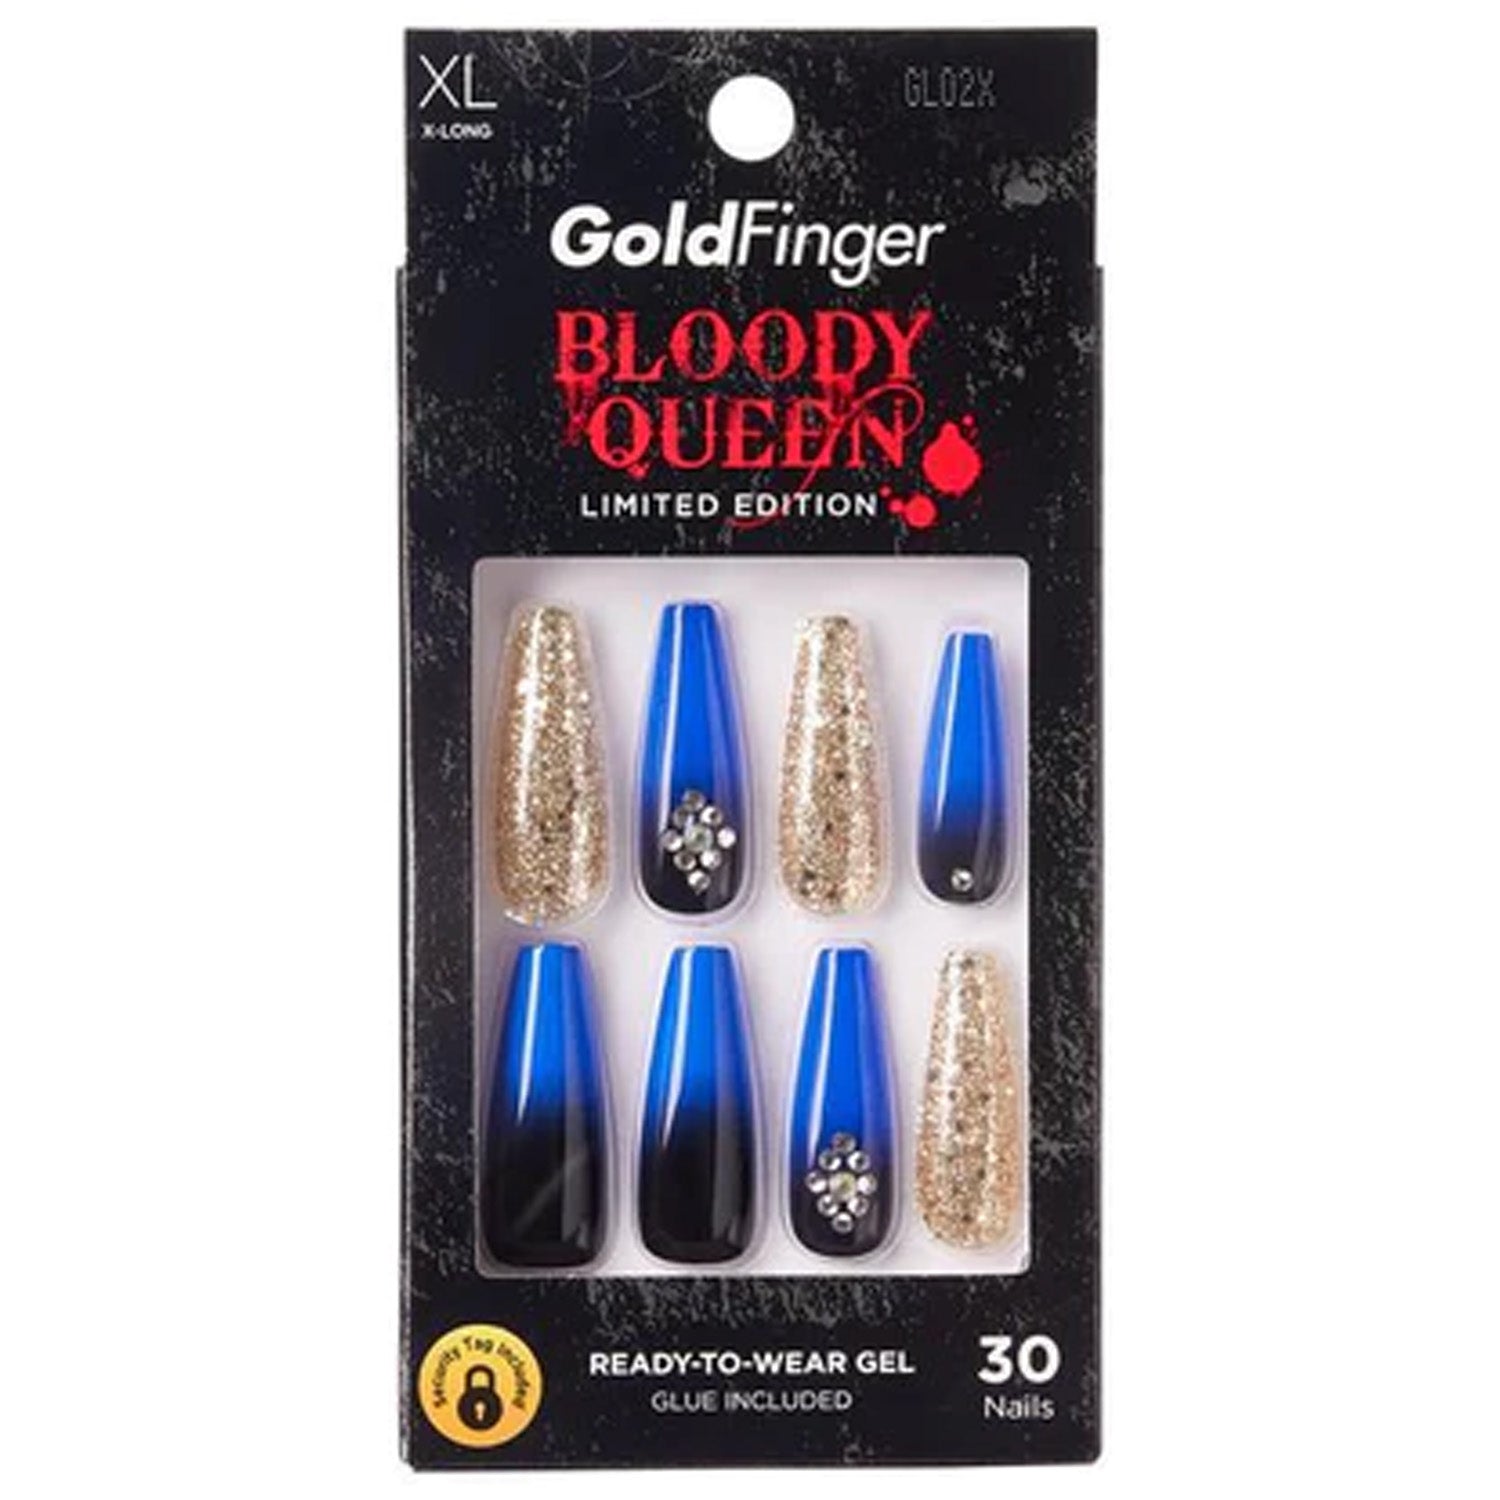 GOLDFINGER BLOODY QUEEN NAILS POTION #GL02X